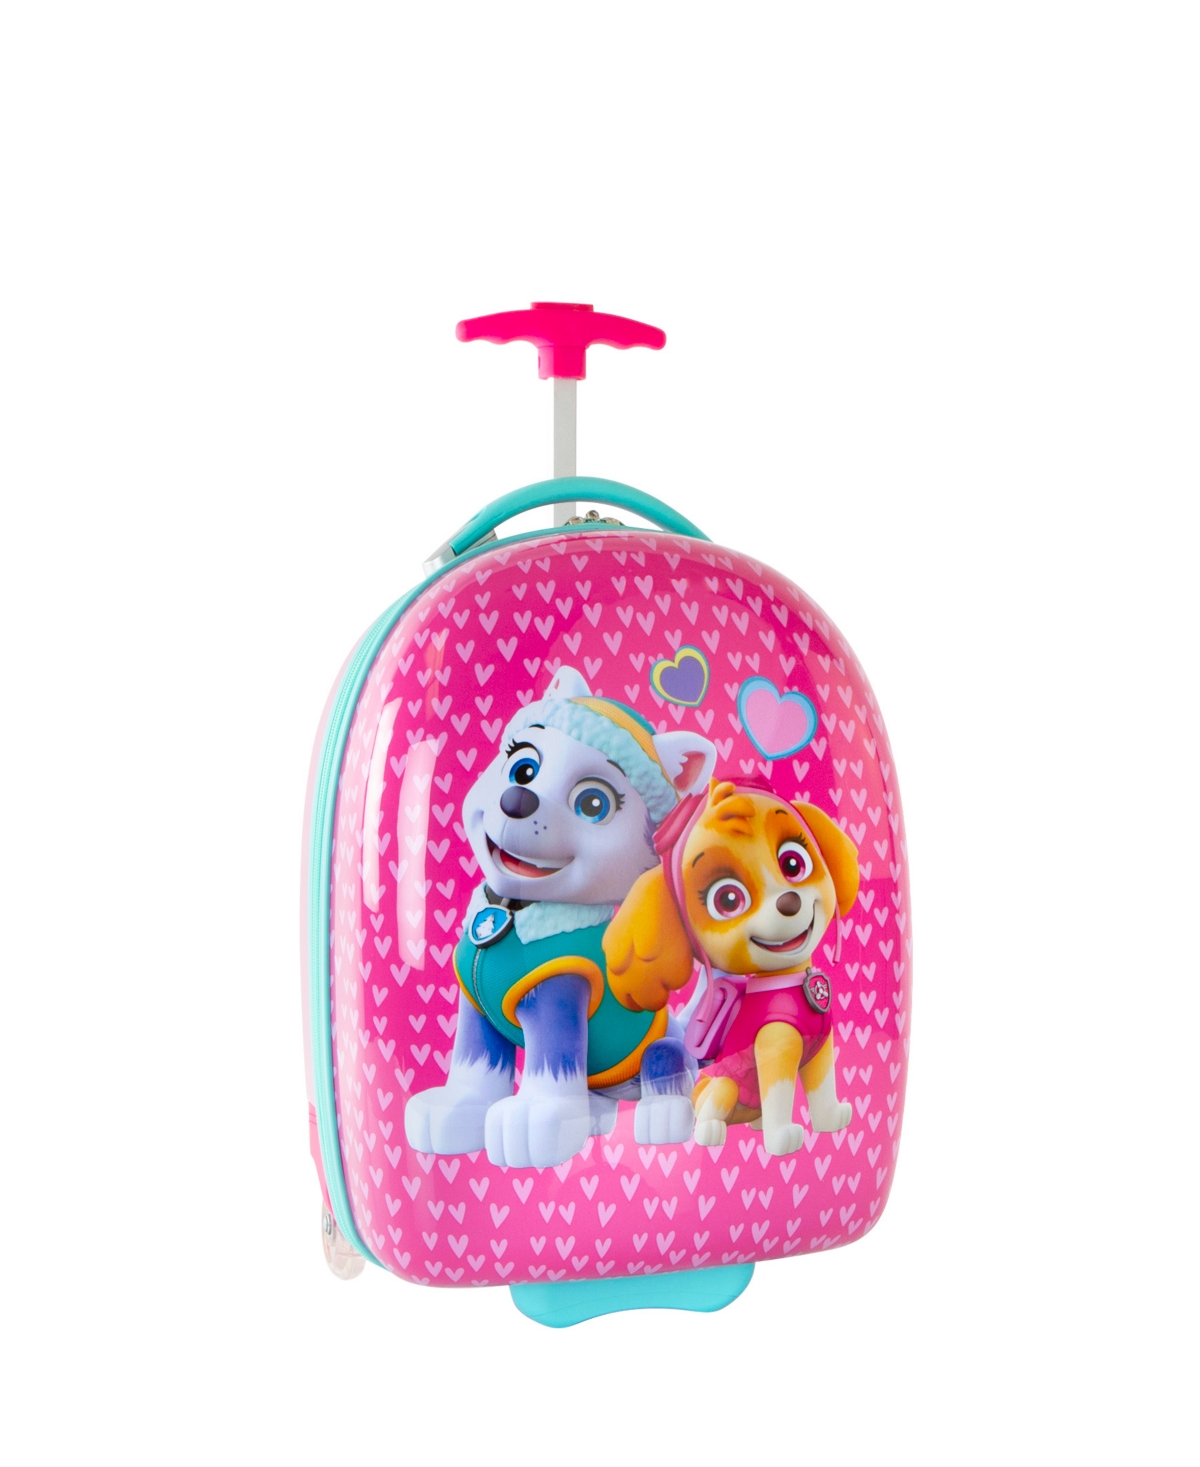 Heys Nickelodeon Paw Patrol 18" Round Carry-on Luggage In Pink